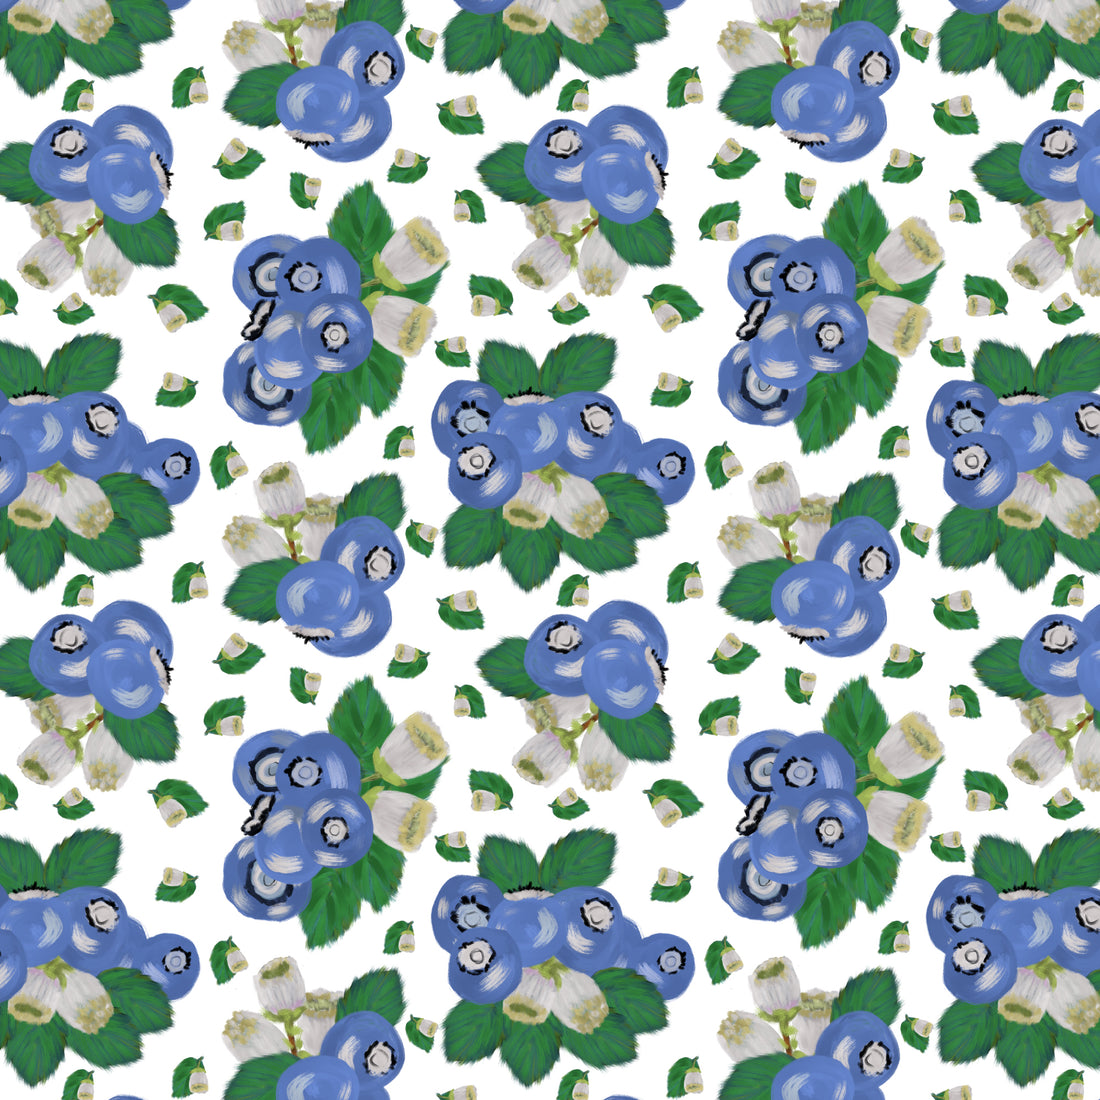 Blueberry Patch - New Art and Pattern Design